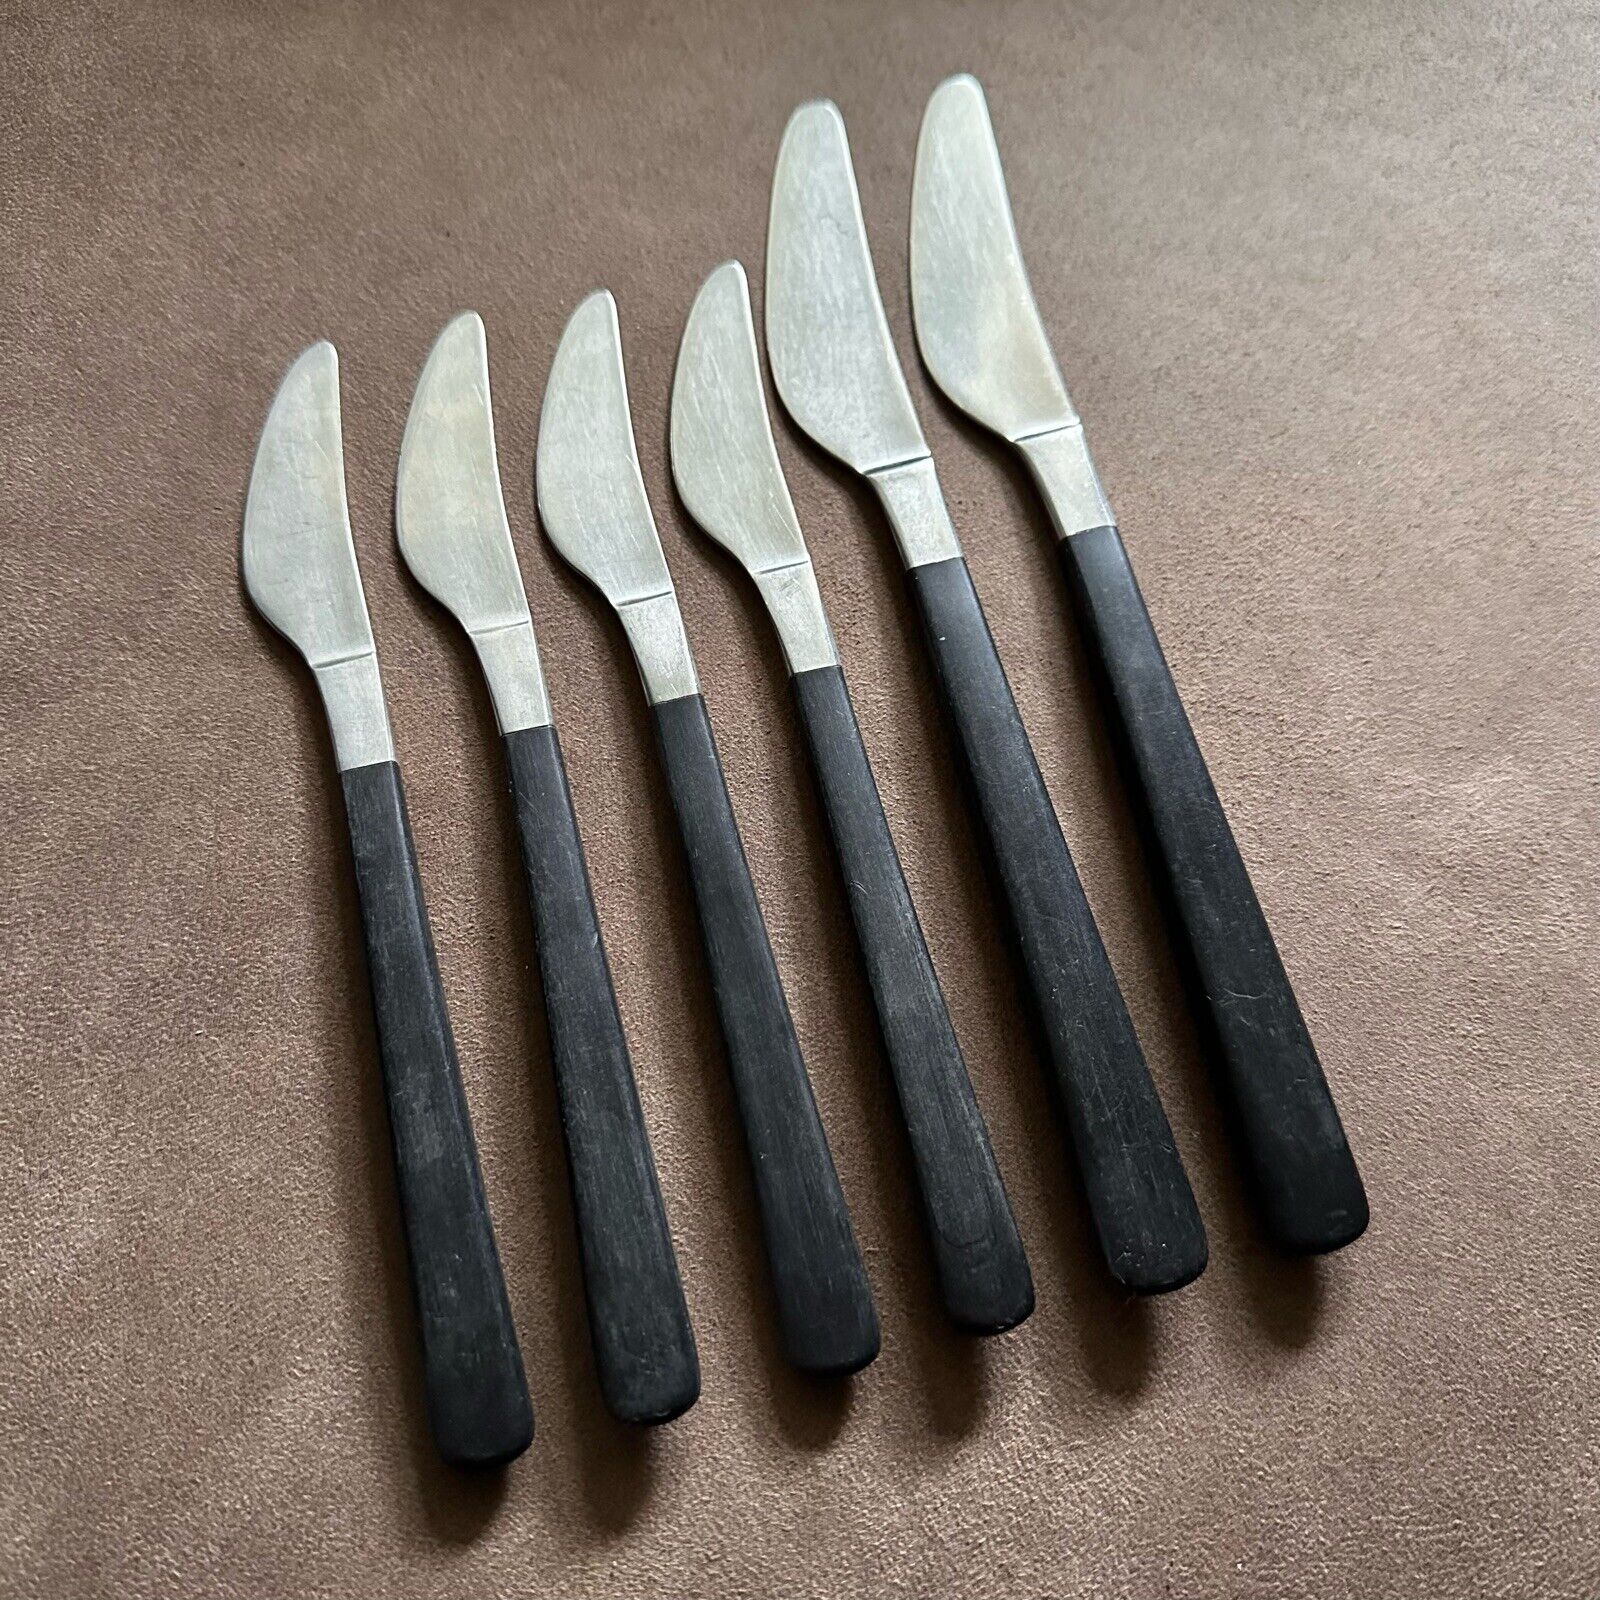 6x VINTAGE RETRO SKANDIA STAINLESS STEEL MADE IN SWEDEN CUTLERY KNIVES